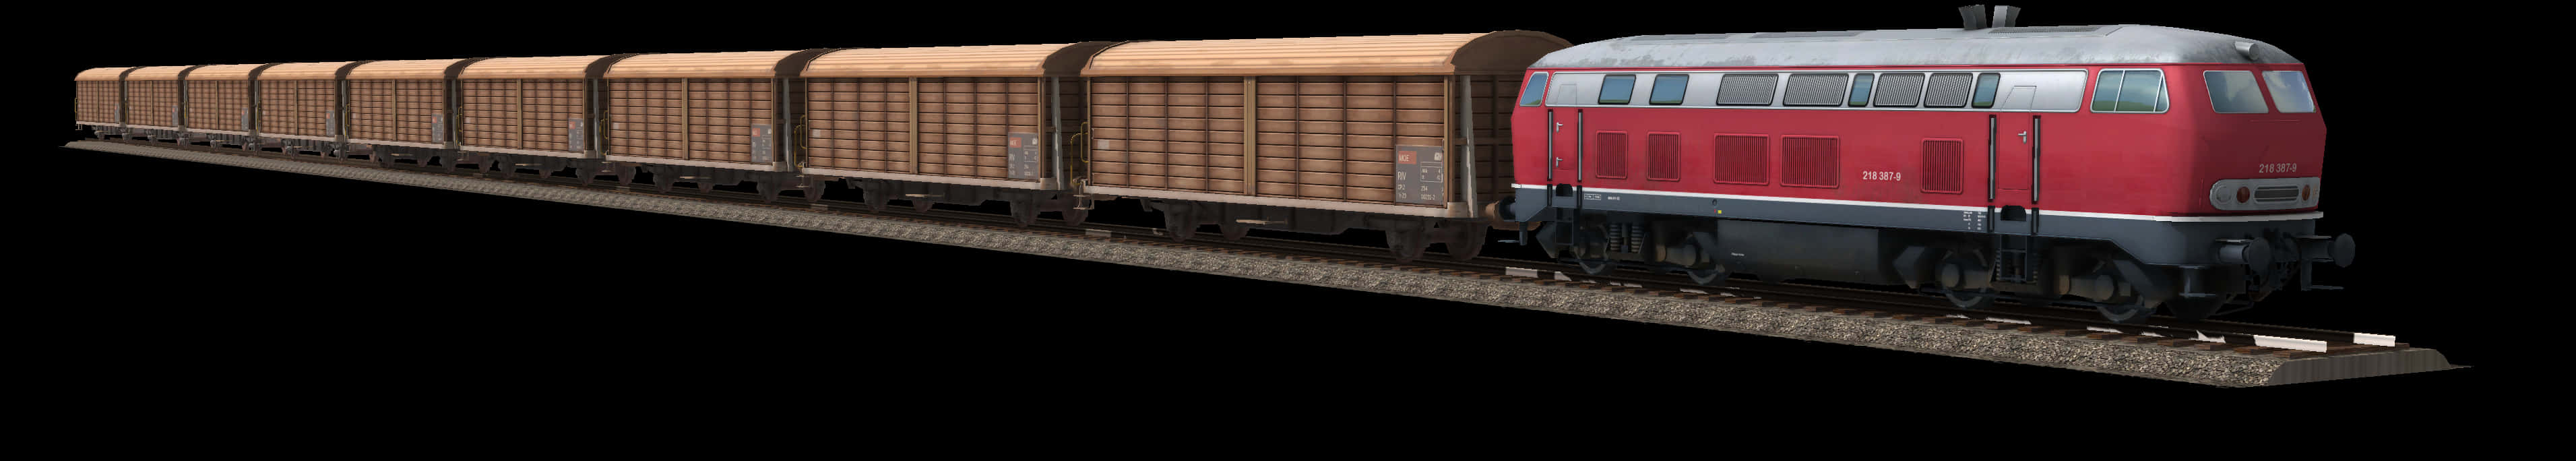 Freight_ Train_at_ Night PNG